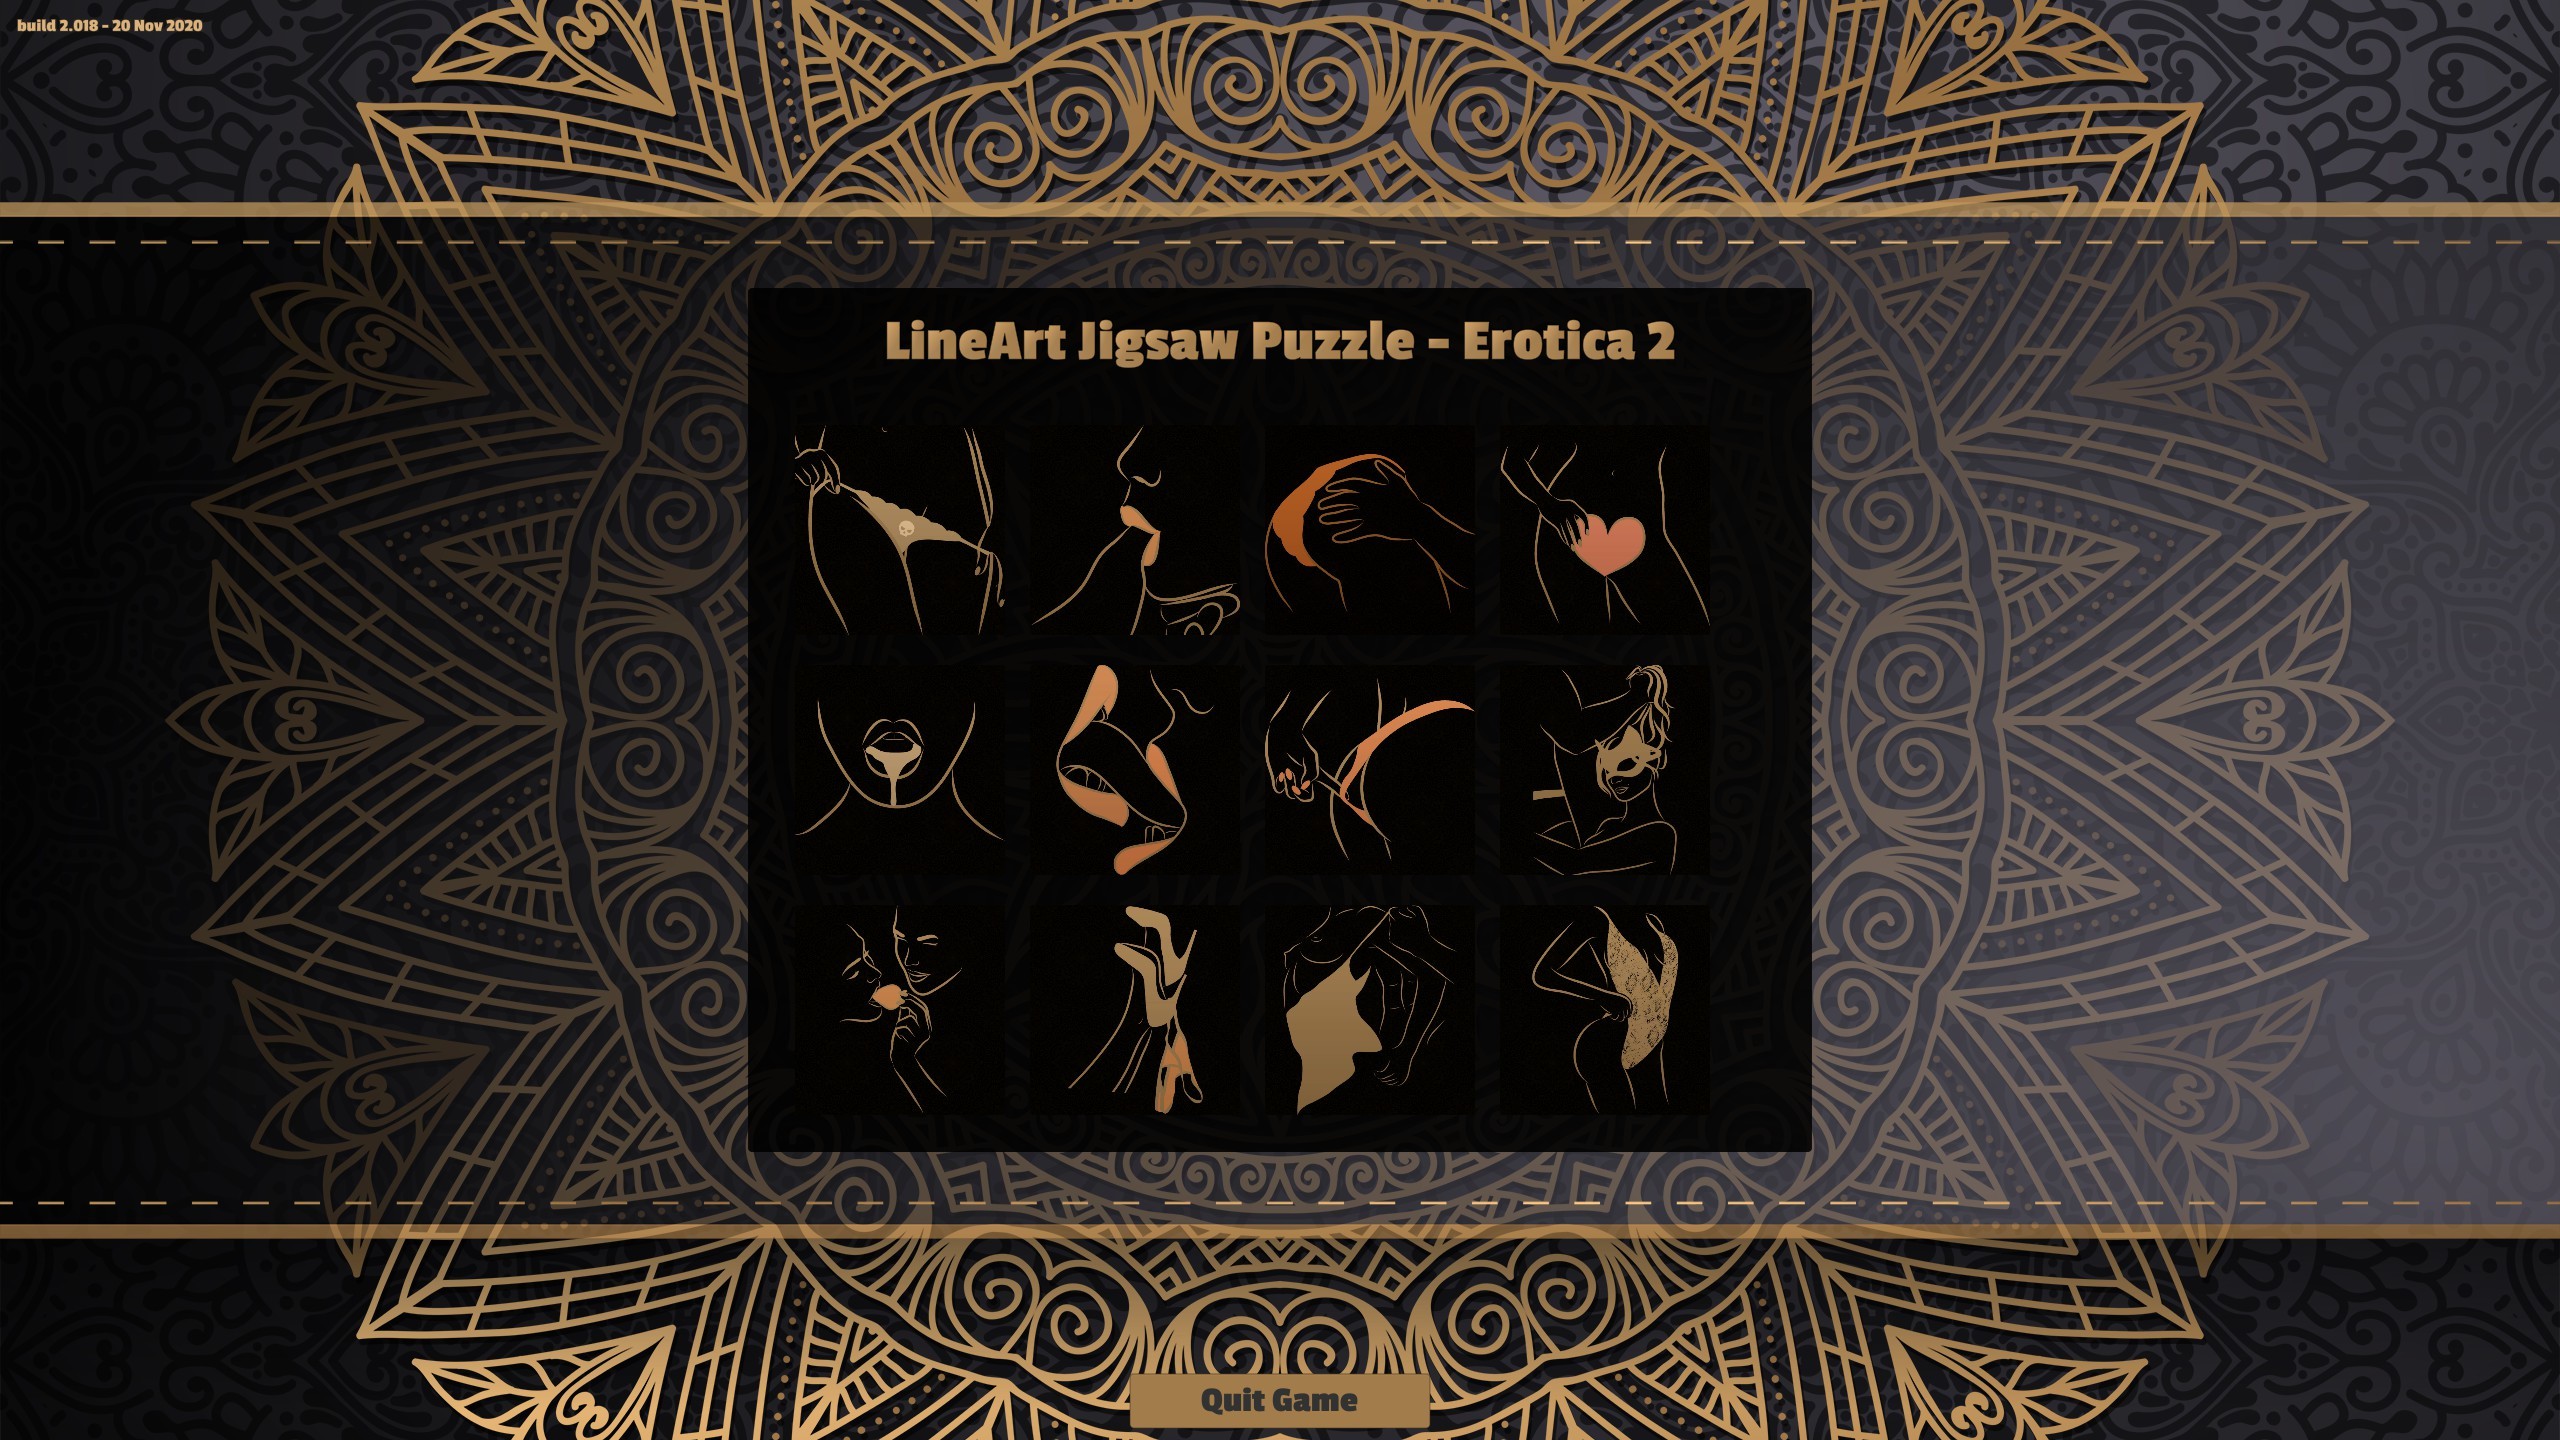 LineArt Jigsaw Puzzle - Erotica 2 Steam CD Key [$ 0.21]